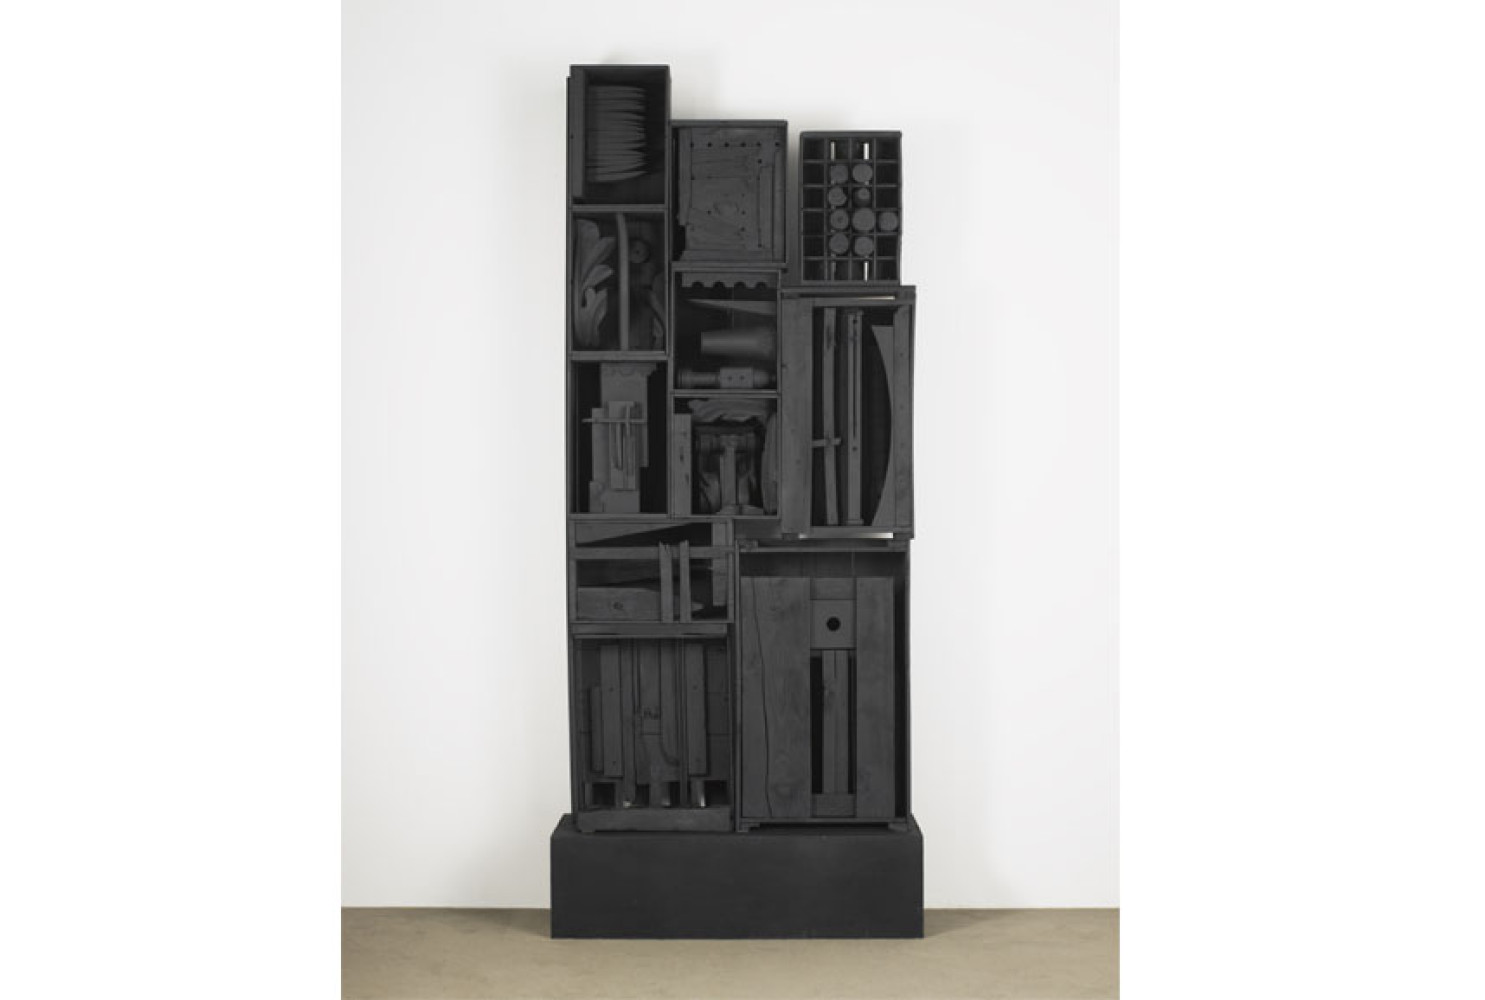 Beards' Wall, 1958—1959, by Louise Nevelson (American, 1899—1988); 11 wood boxes painted black, 102 1/2 x 41 1/2 x 14 1/2 inches;  Photograph by Kerry Ryan McFate, courtesy Pace Gallery; © 2018 Estate of Louise Nevelson / Artists Rights Society (ARS), New York